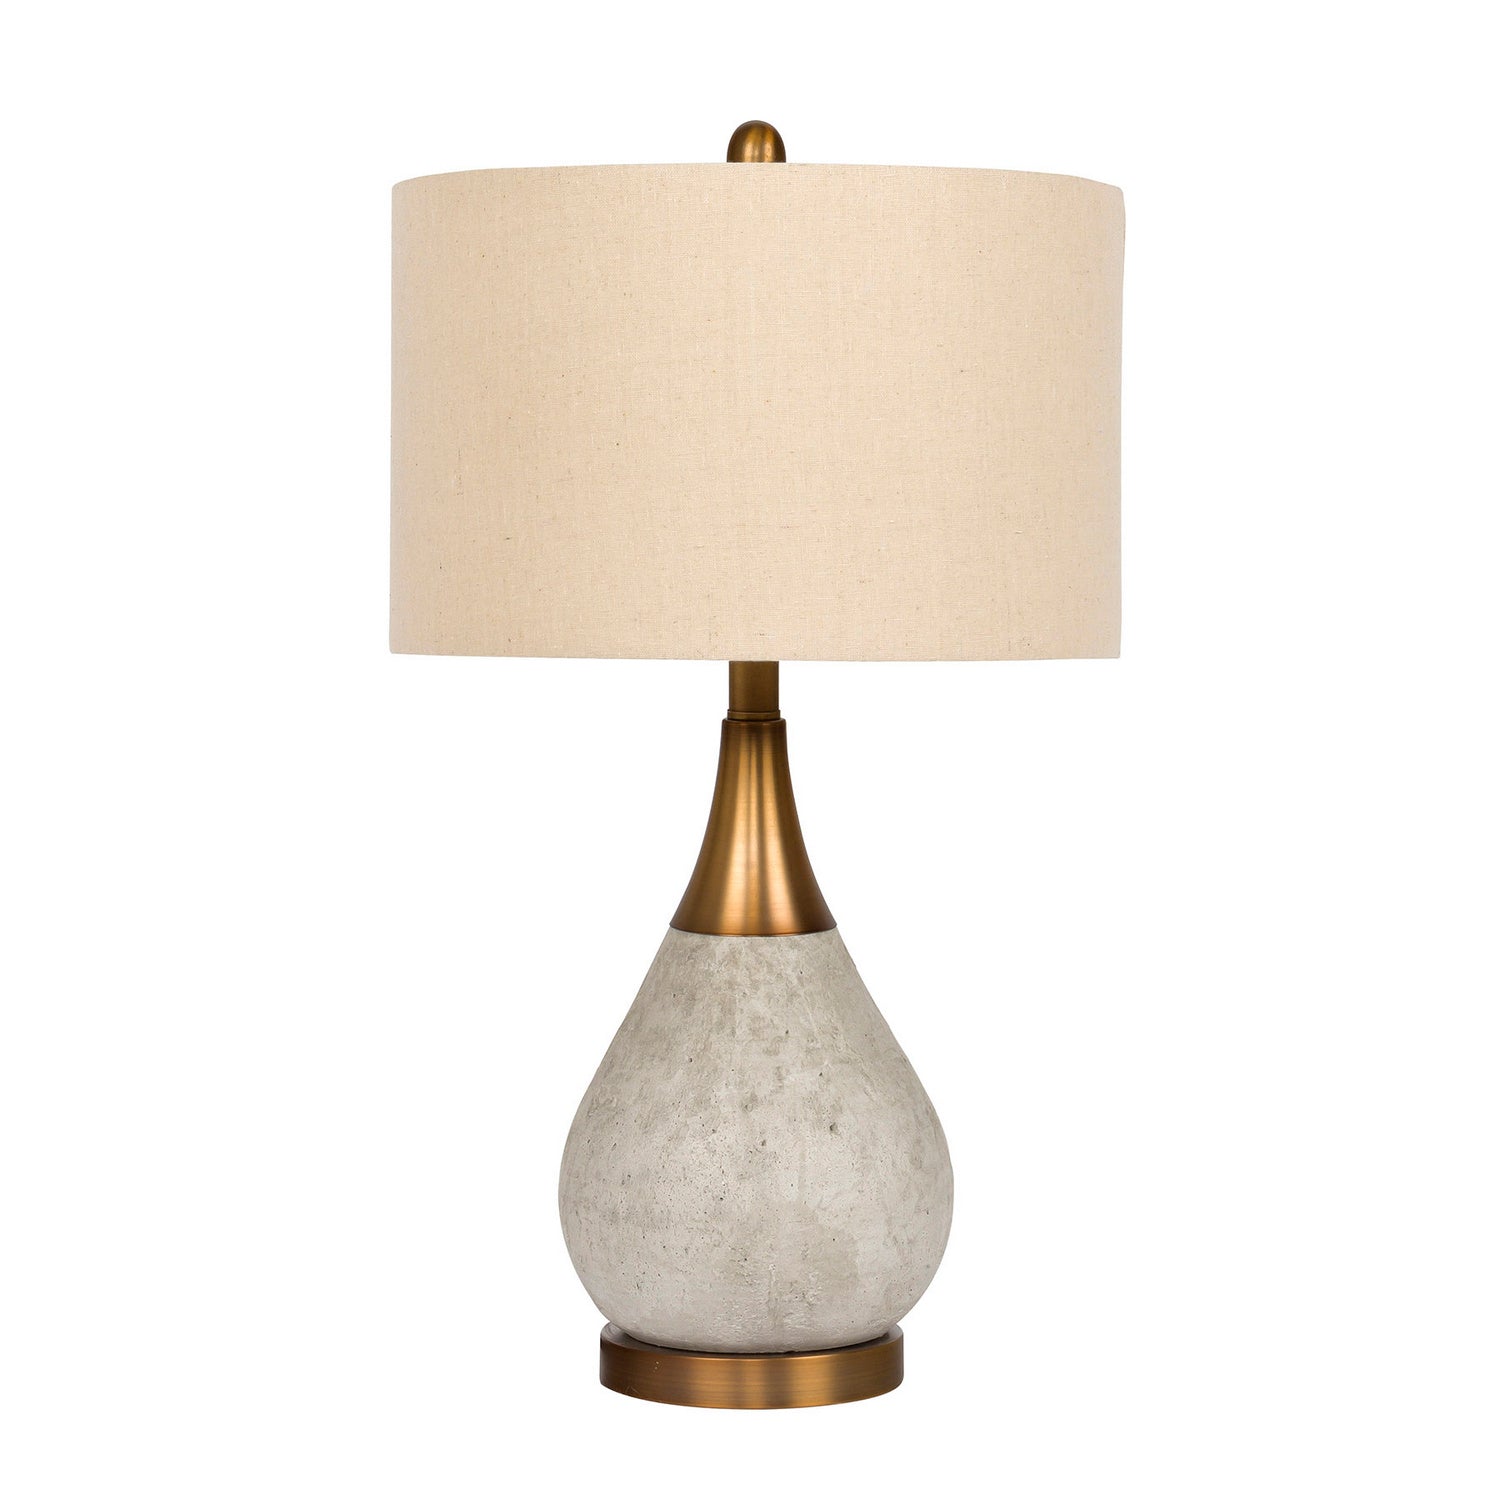 Craftmade - 86237 - One Light Table Lamp - Table Lamp - Natural Concrete/Antique Brass